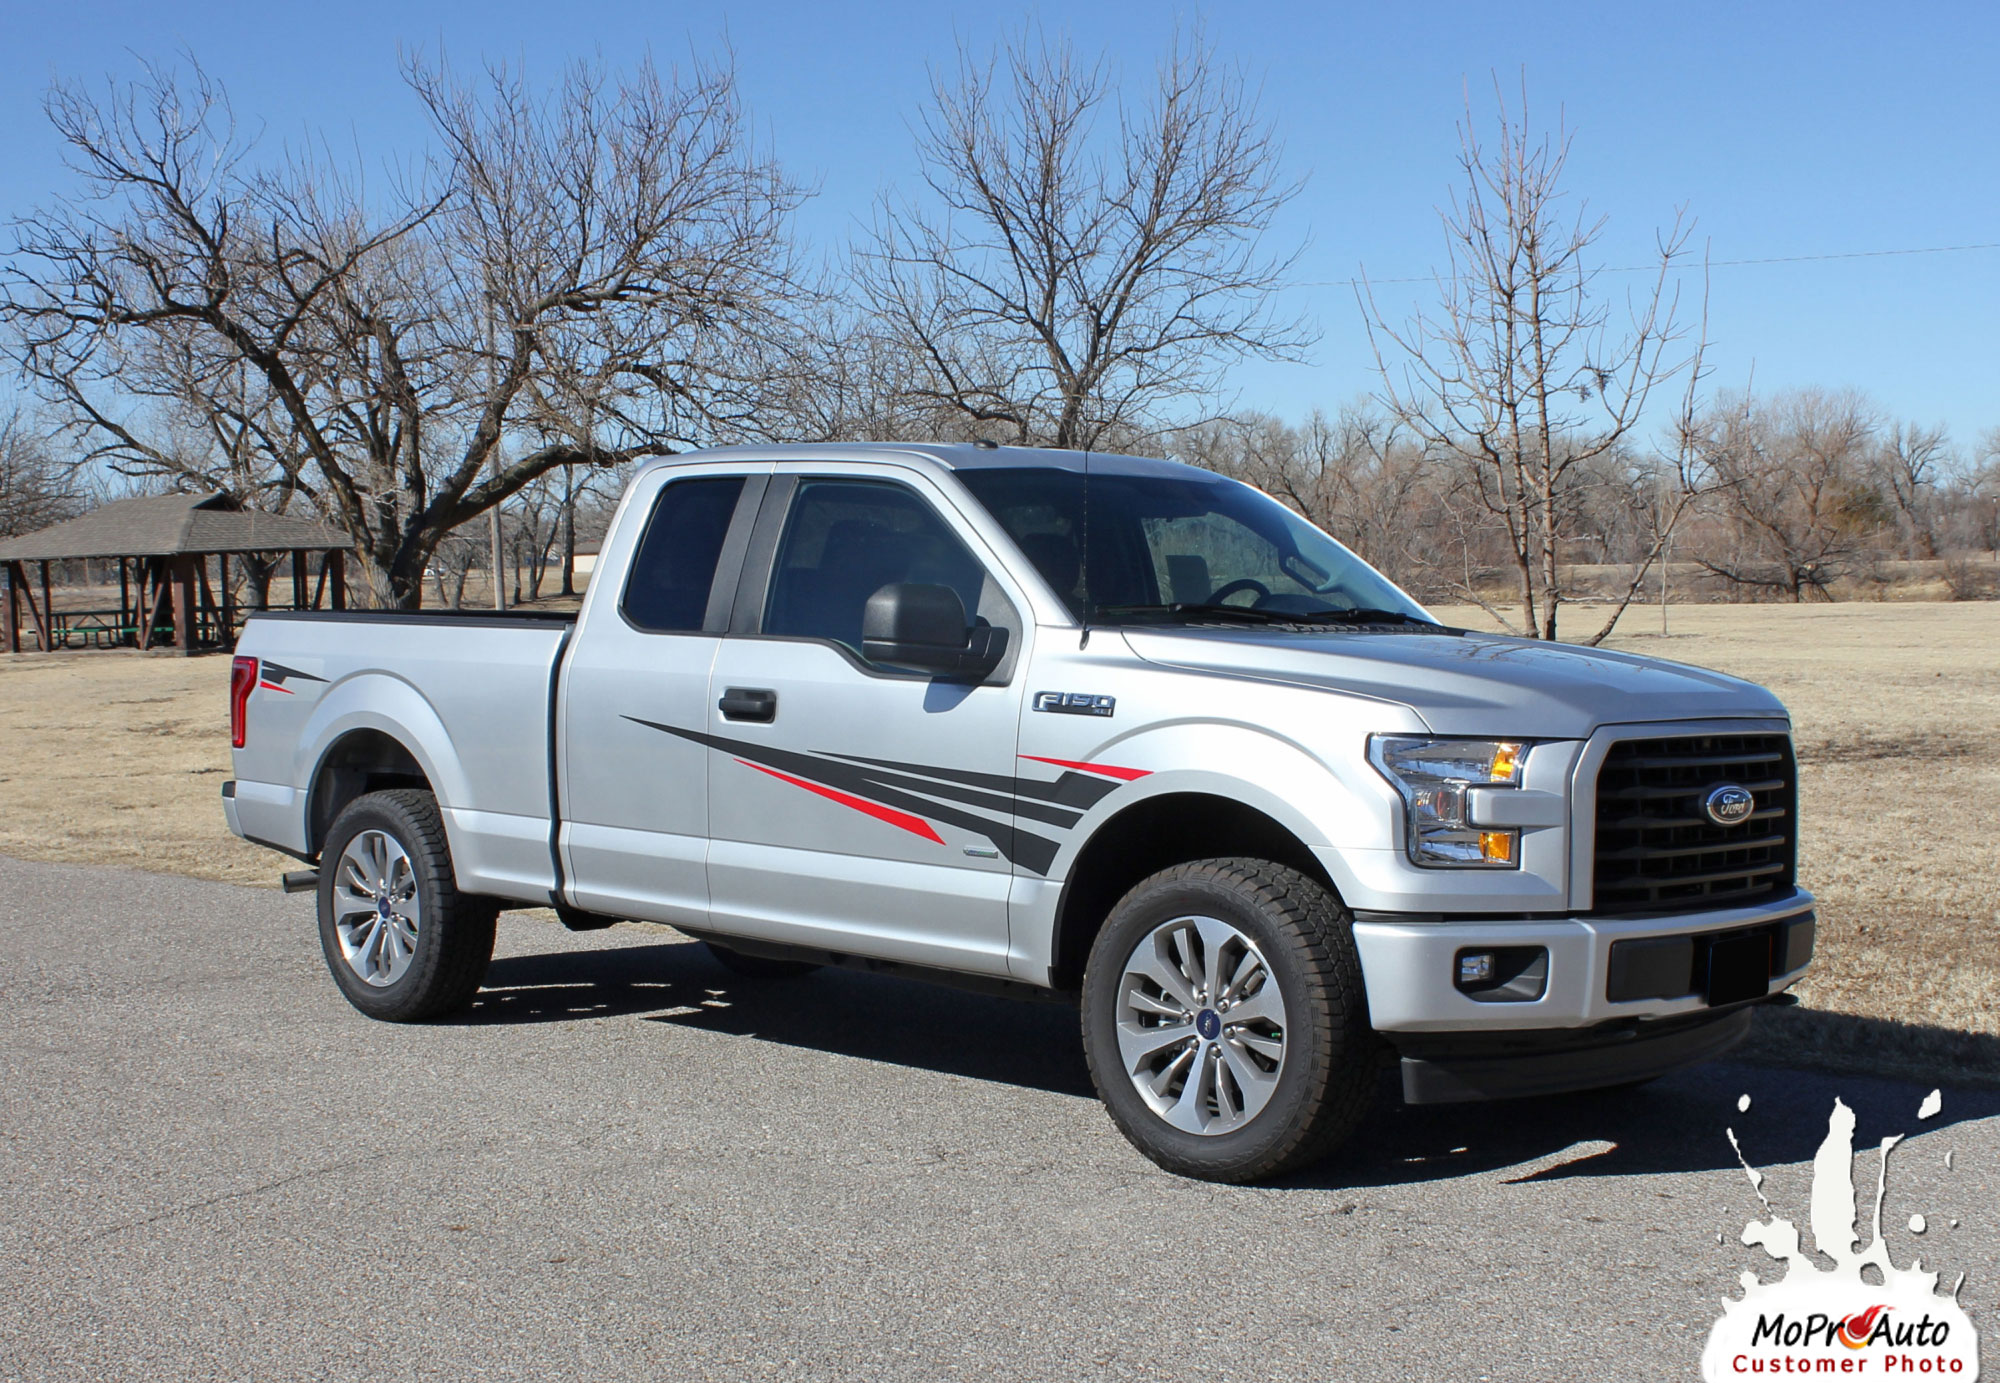 Apollo Fender Door Ford F-Series F-150 Appearance Package Vinyl Graphics and Decals Kit - Customer Photo